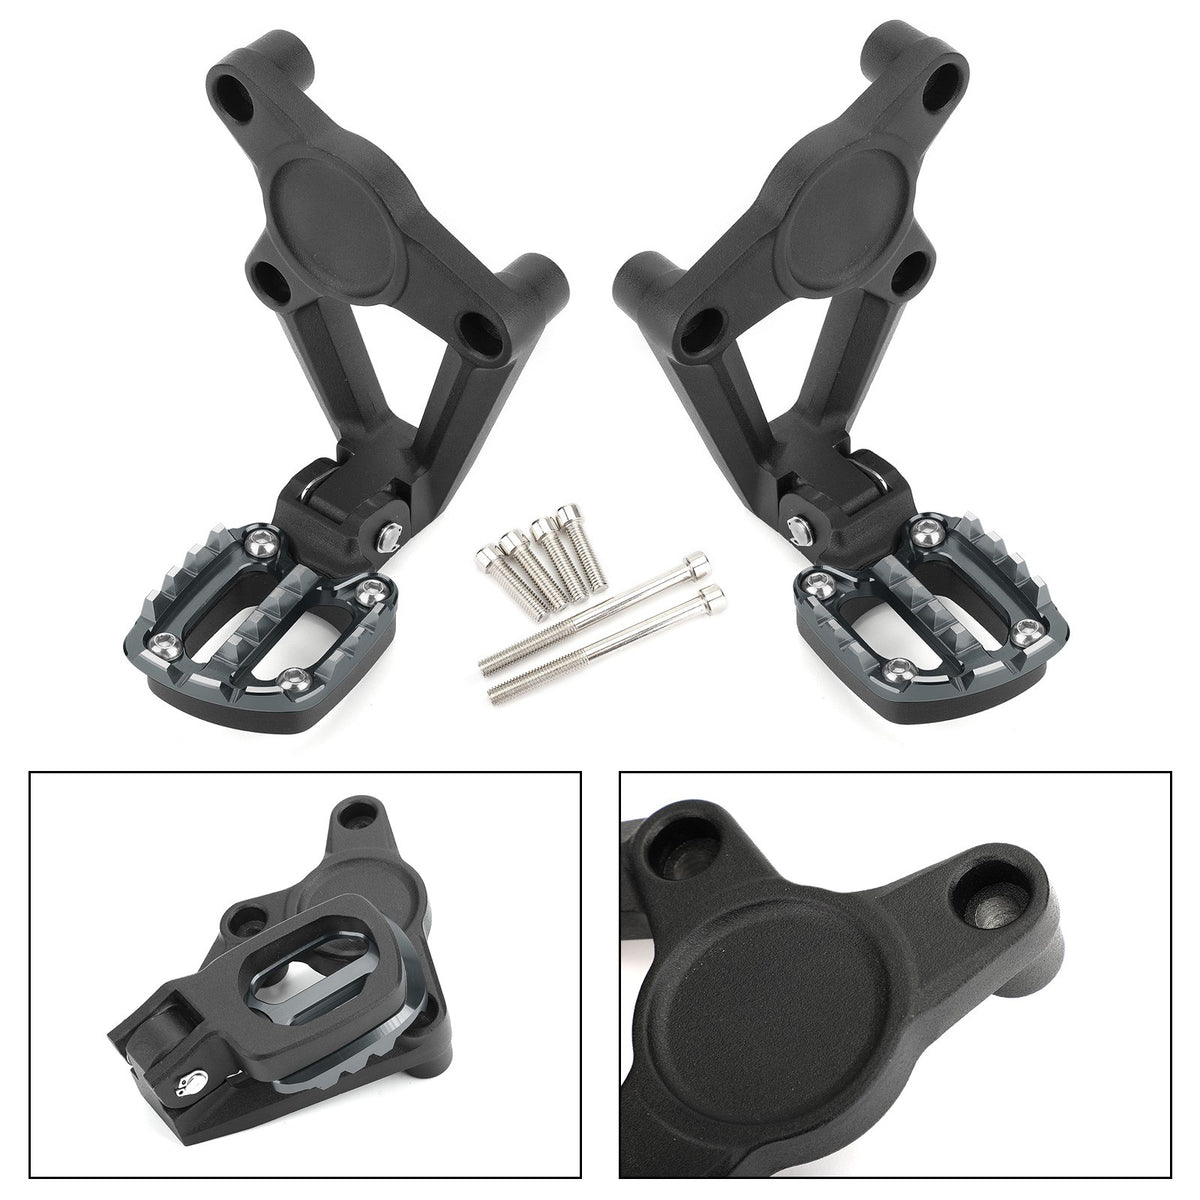 Moto Folding Footrests Foot Pegs Rear Pedals For Honda X-ADV 750 2017-2018 TI